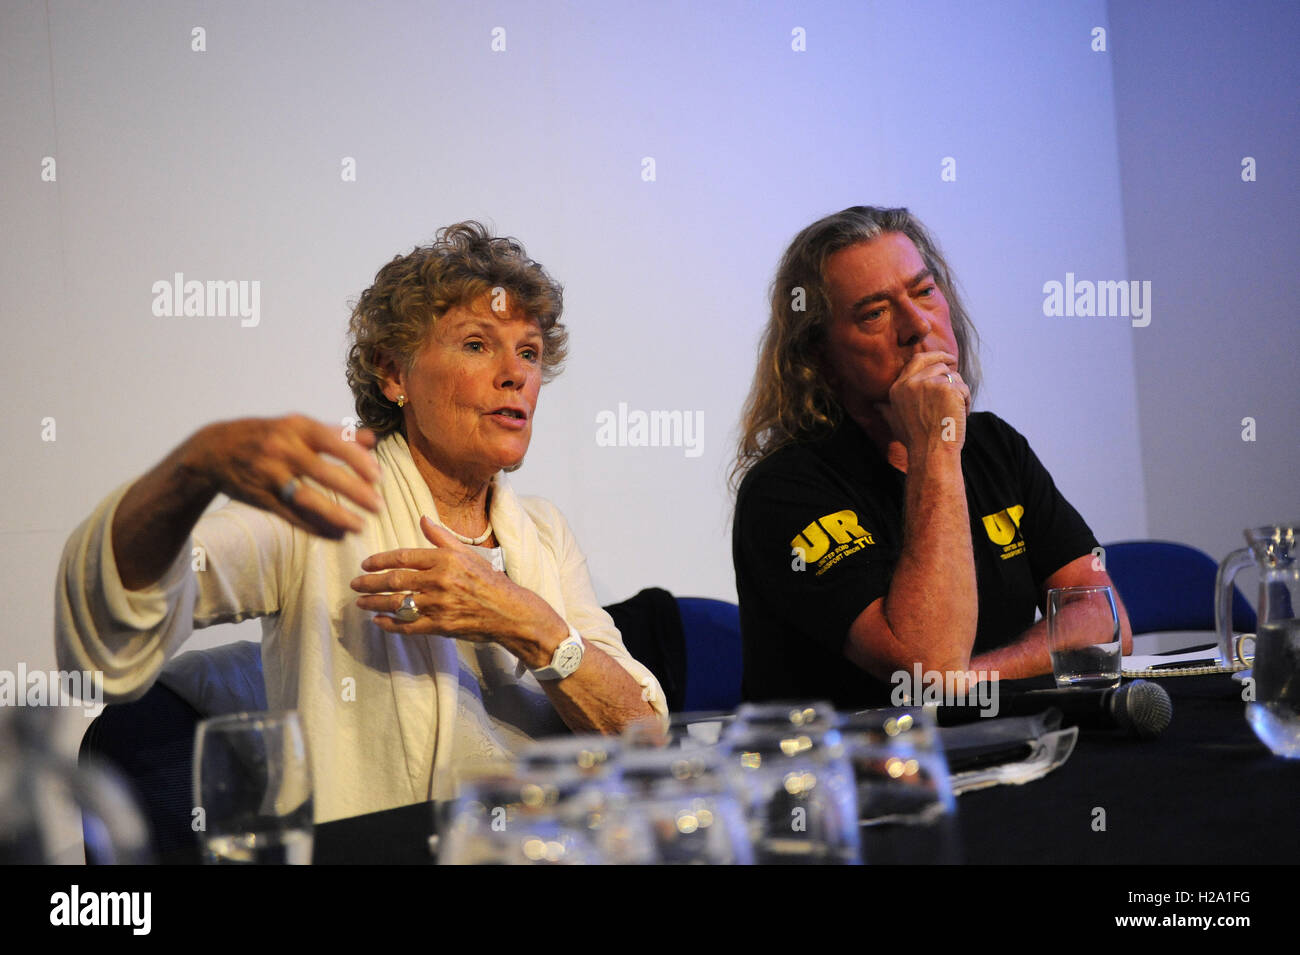 Liverpool, England. 26th September, 2016.  Kate Hoey MP, answers questions during the 'The Case Against All Cuts' fringe meeting organised by Trade Union Coordinating Committee. The meeting was part of the second day of the Labour Party annual conference at the ACC Conference Centre. This conference is following Jeremy CorbynÕs re-election as labour party leader after nine weeks of campaigning against fellow candidate, Owen Smith. This is his second leadership victory in just over twelve months and was initiated by the decision of Angela Eagle to stand against him. Credit: Kevin Hayes/Alamy Li Stock Photo